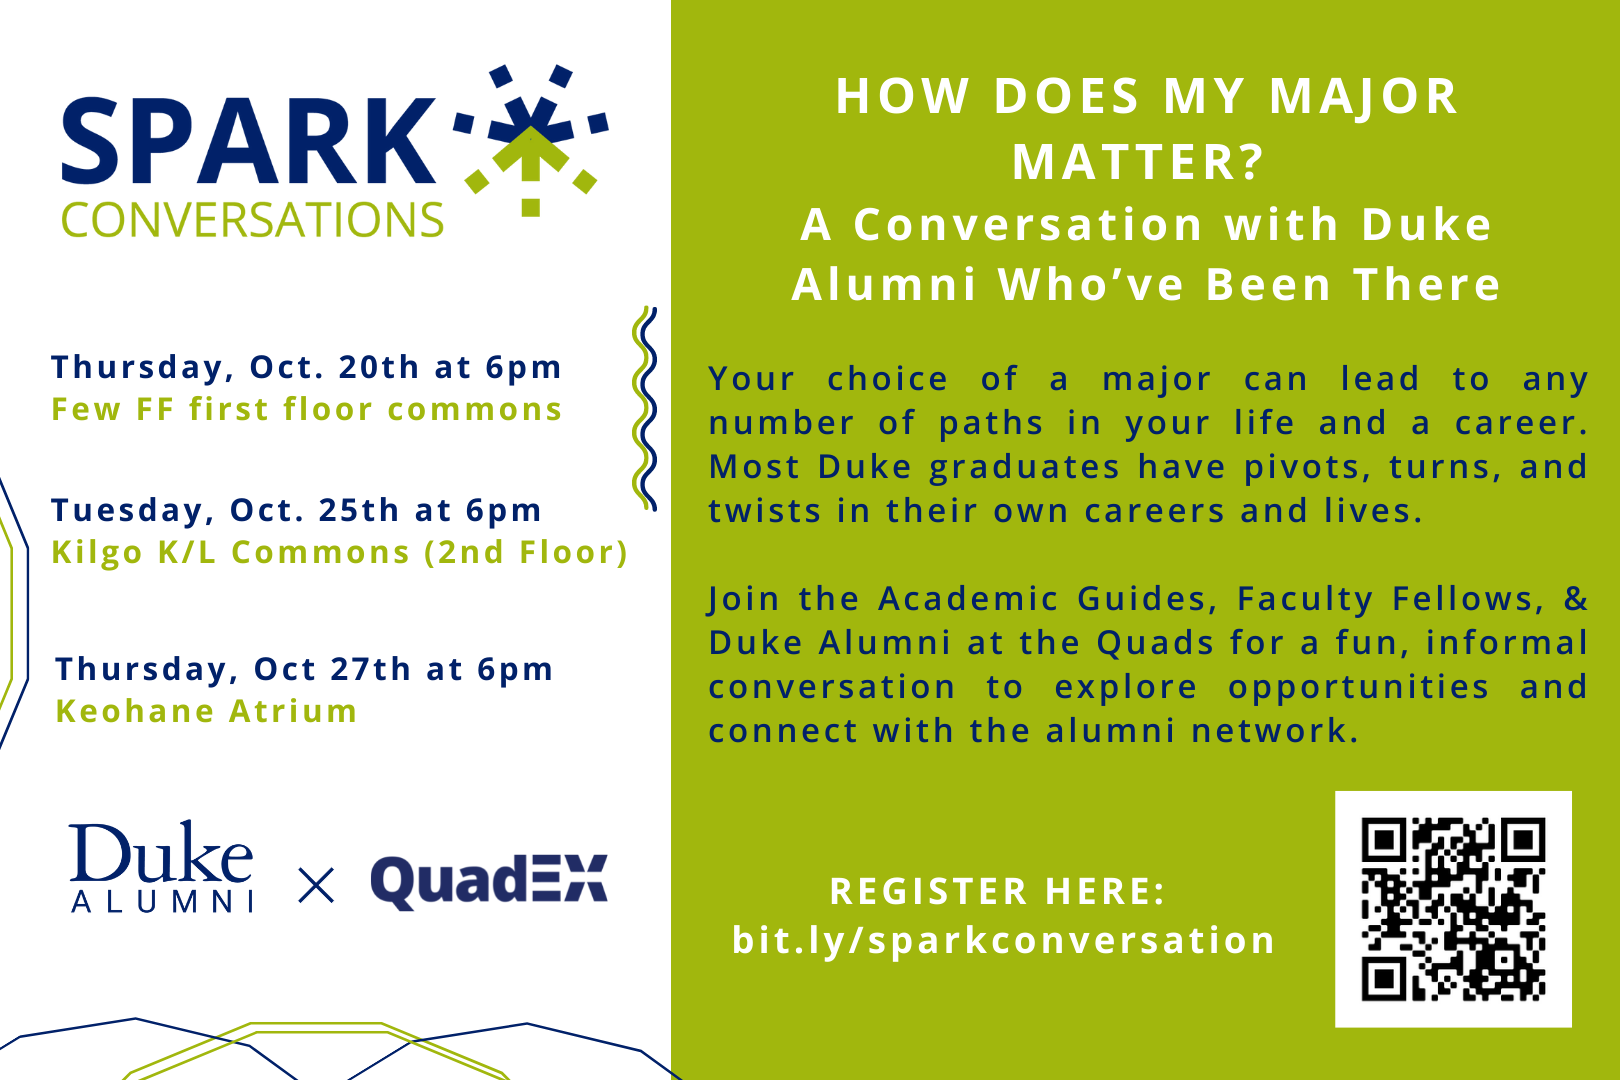 How Does My Major Matter? A Conversation with Duke Alumni Who've Been There register here: bit.ly/sparkconversation